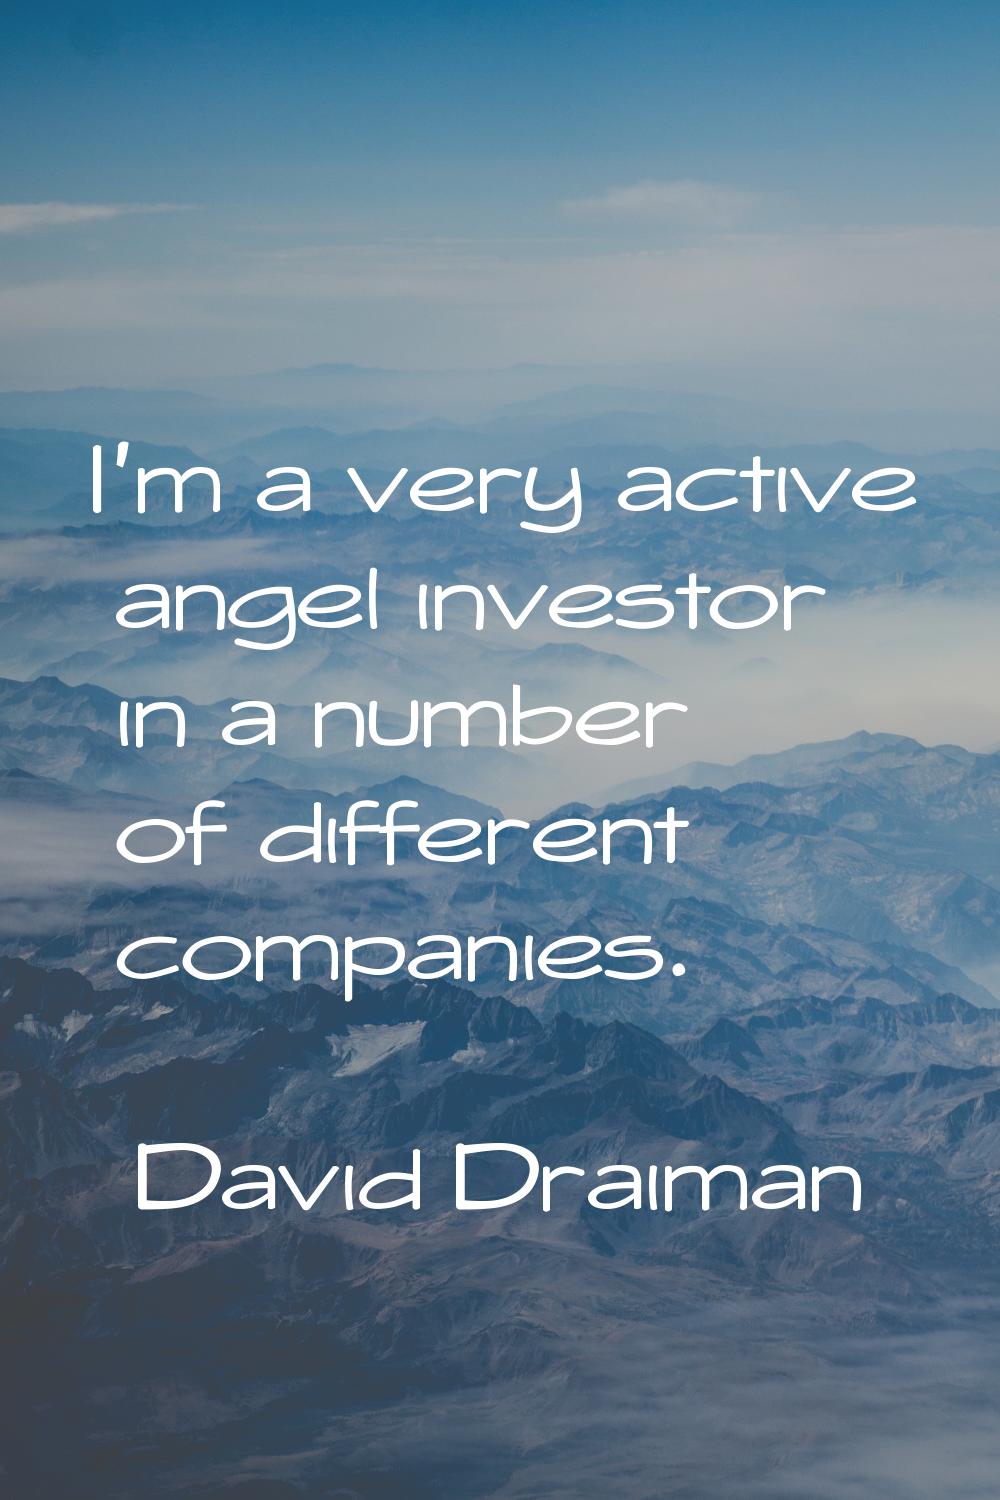 I'm a very active angel investor in a number of different companies.